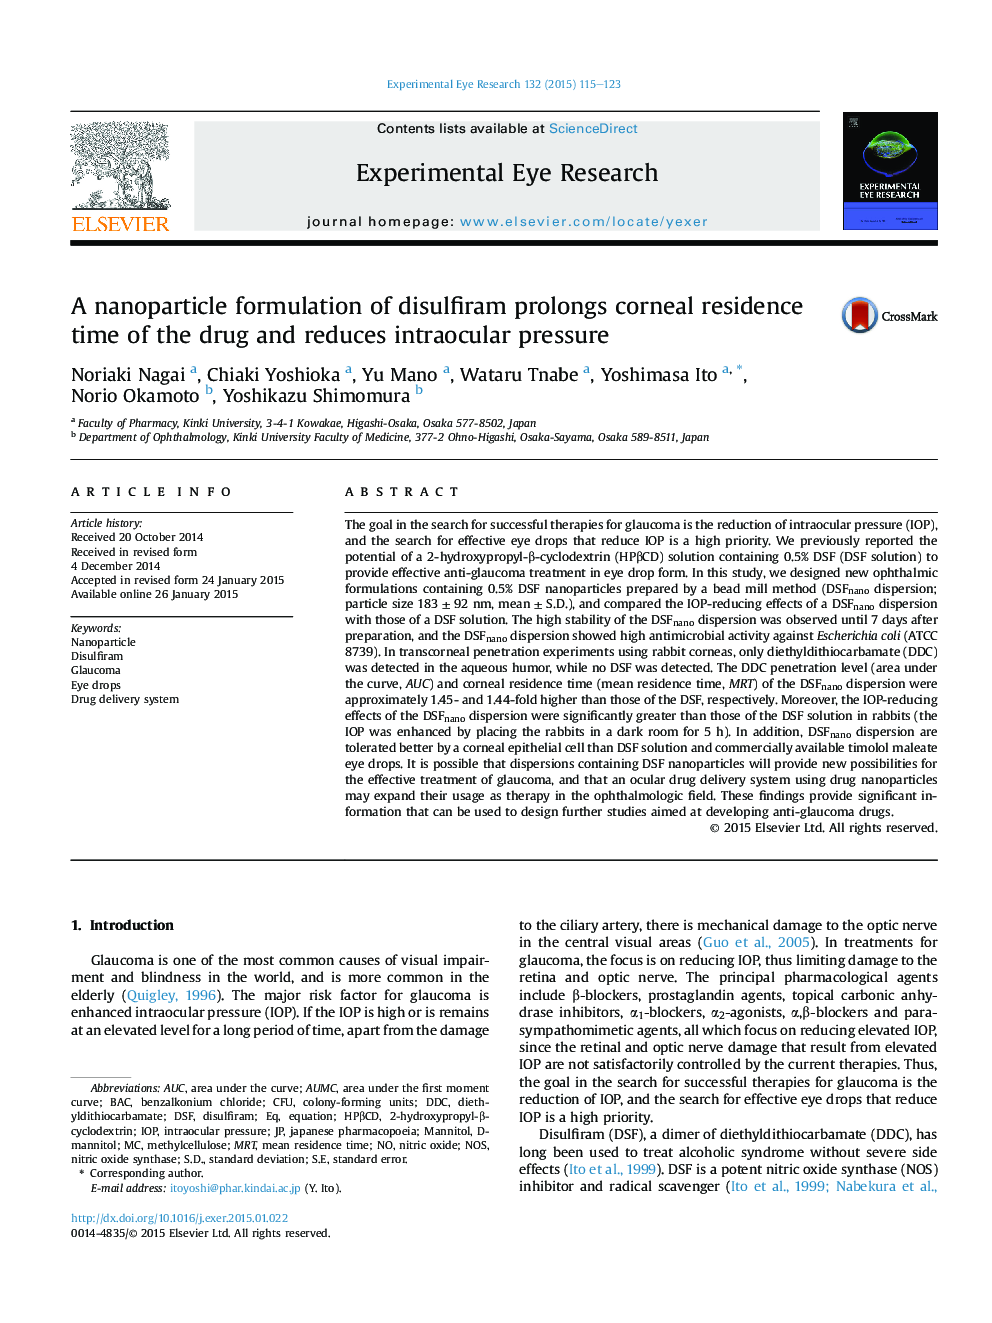 A nanoparticle formulation of disulfiram prolongs corneal residence time of the drug and reduces intraocular pressure